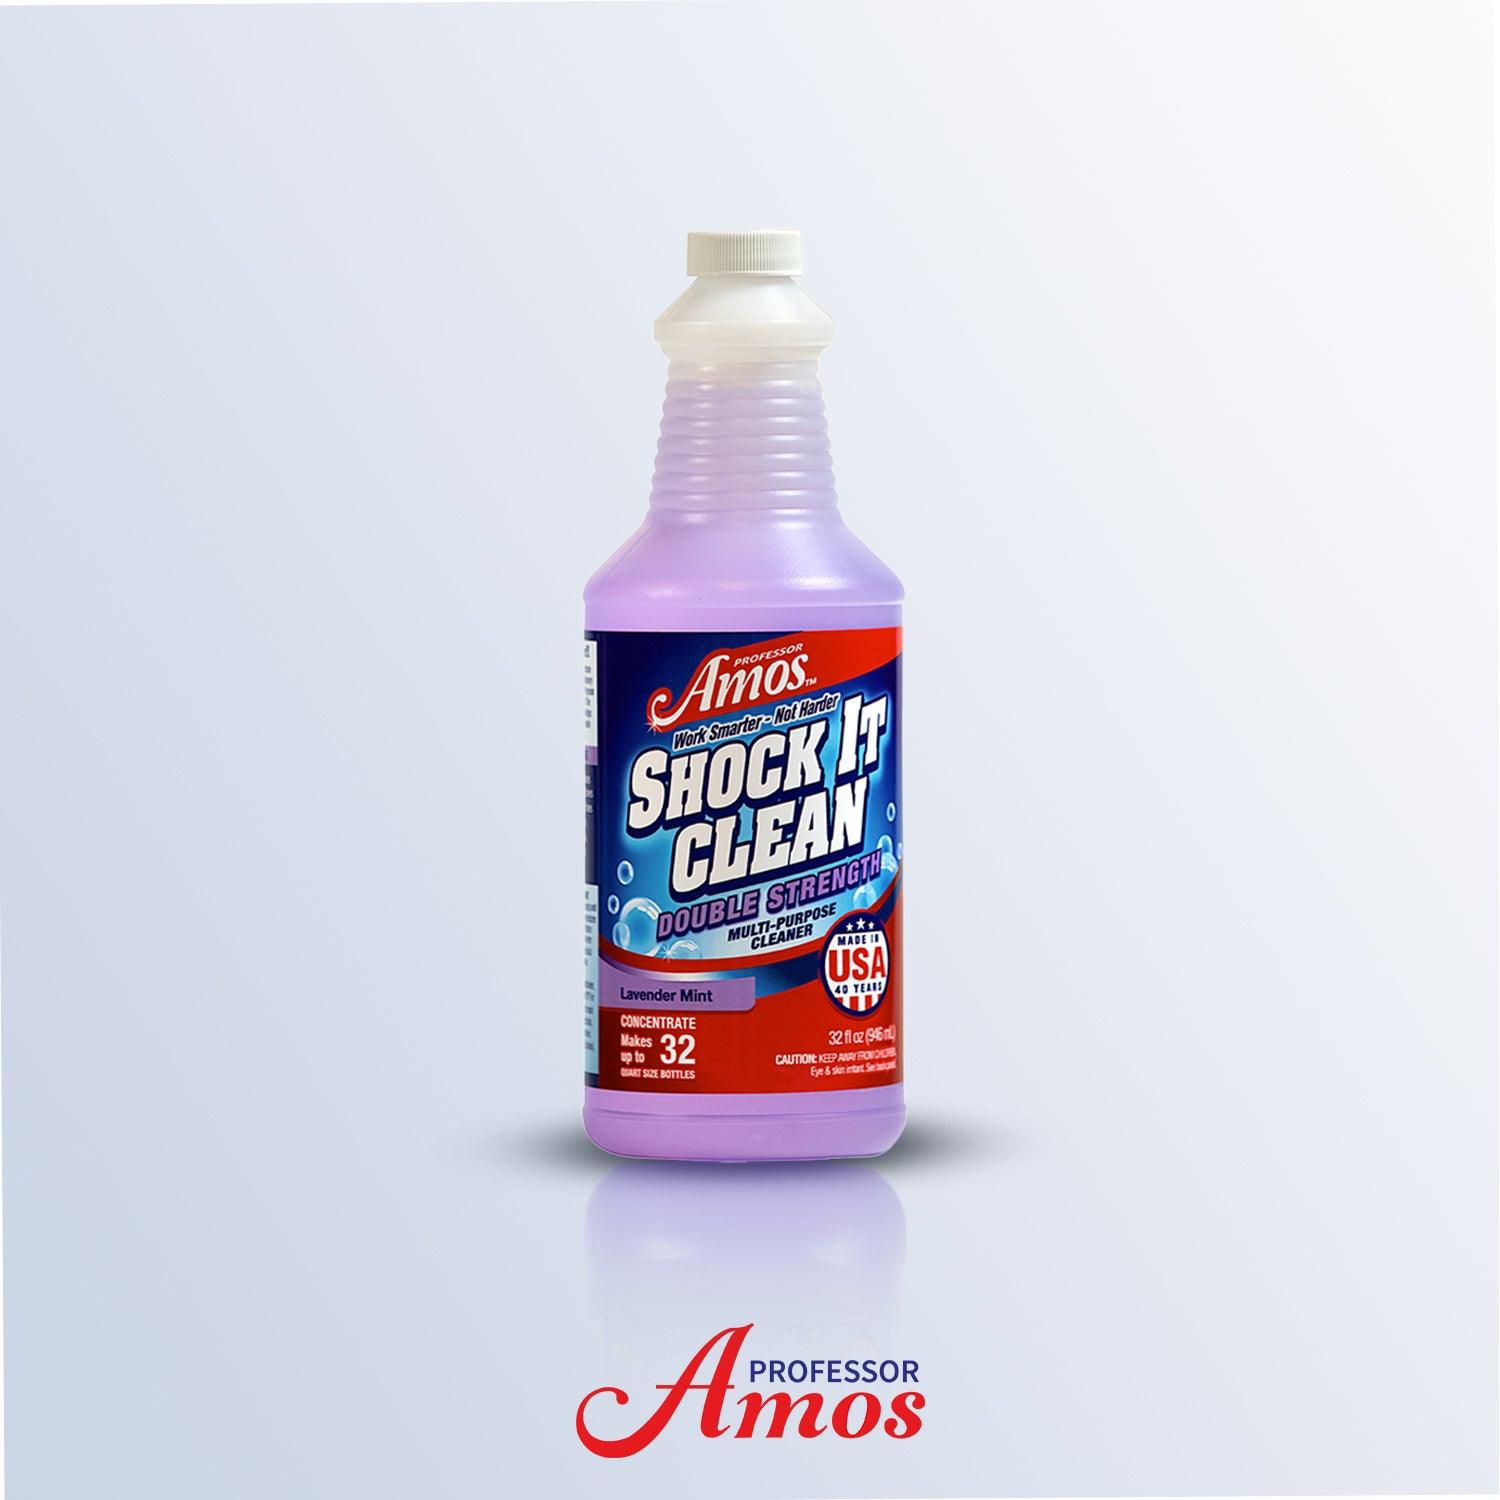 Shock It Clean ™ Double Strength Kit Makes Up To 32 Bottles | Concentrate Liquid - Professor Amos USA